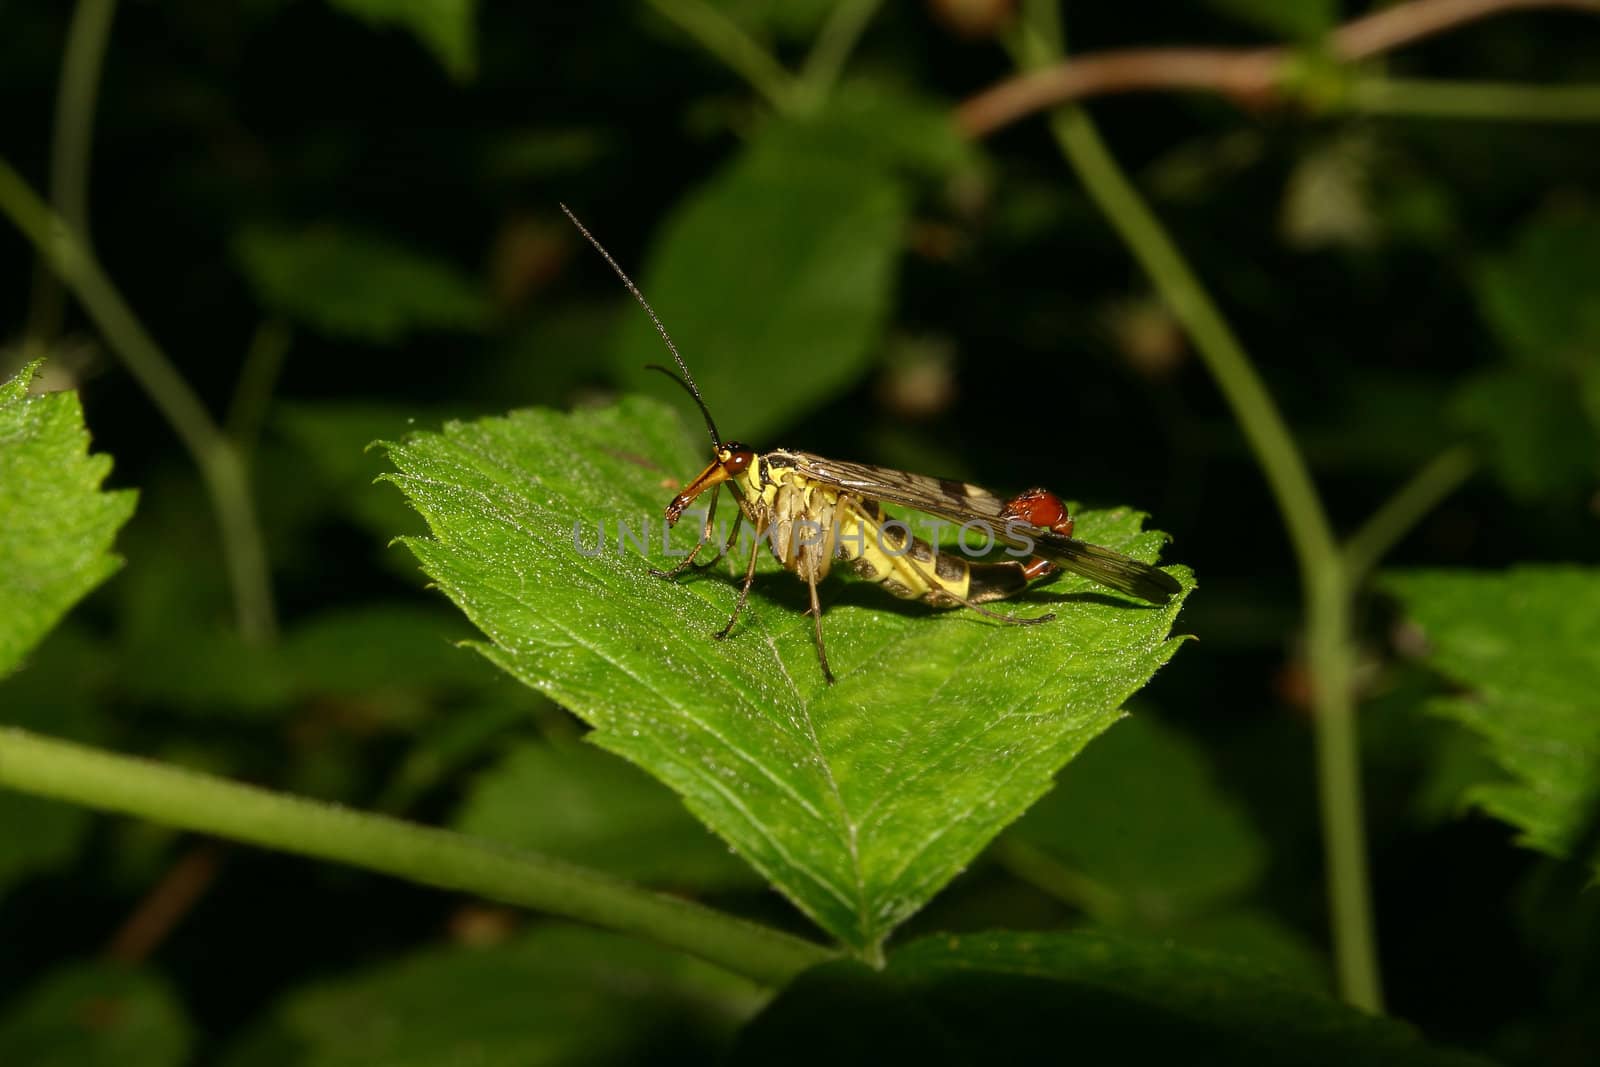 Common scorpionfly (Panorpa communis) - male on a leaf